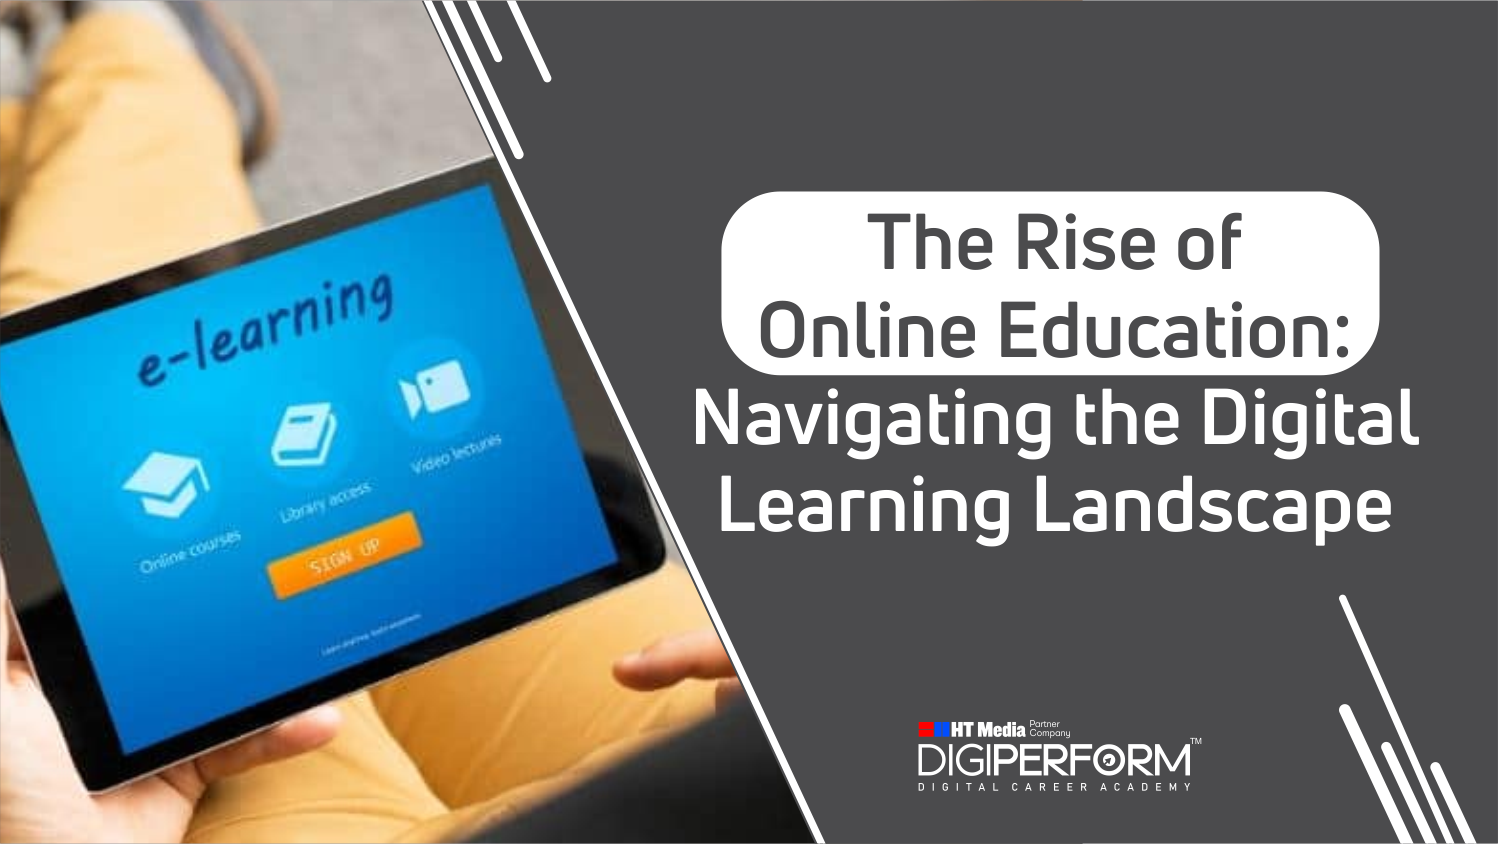 The Rise of Online Education: Navigating the Digital Learning Landscape